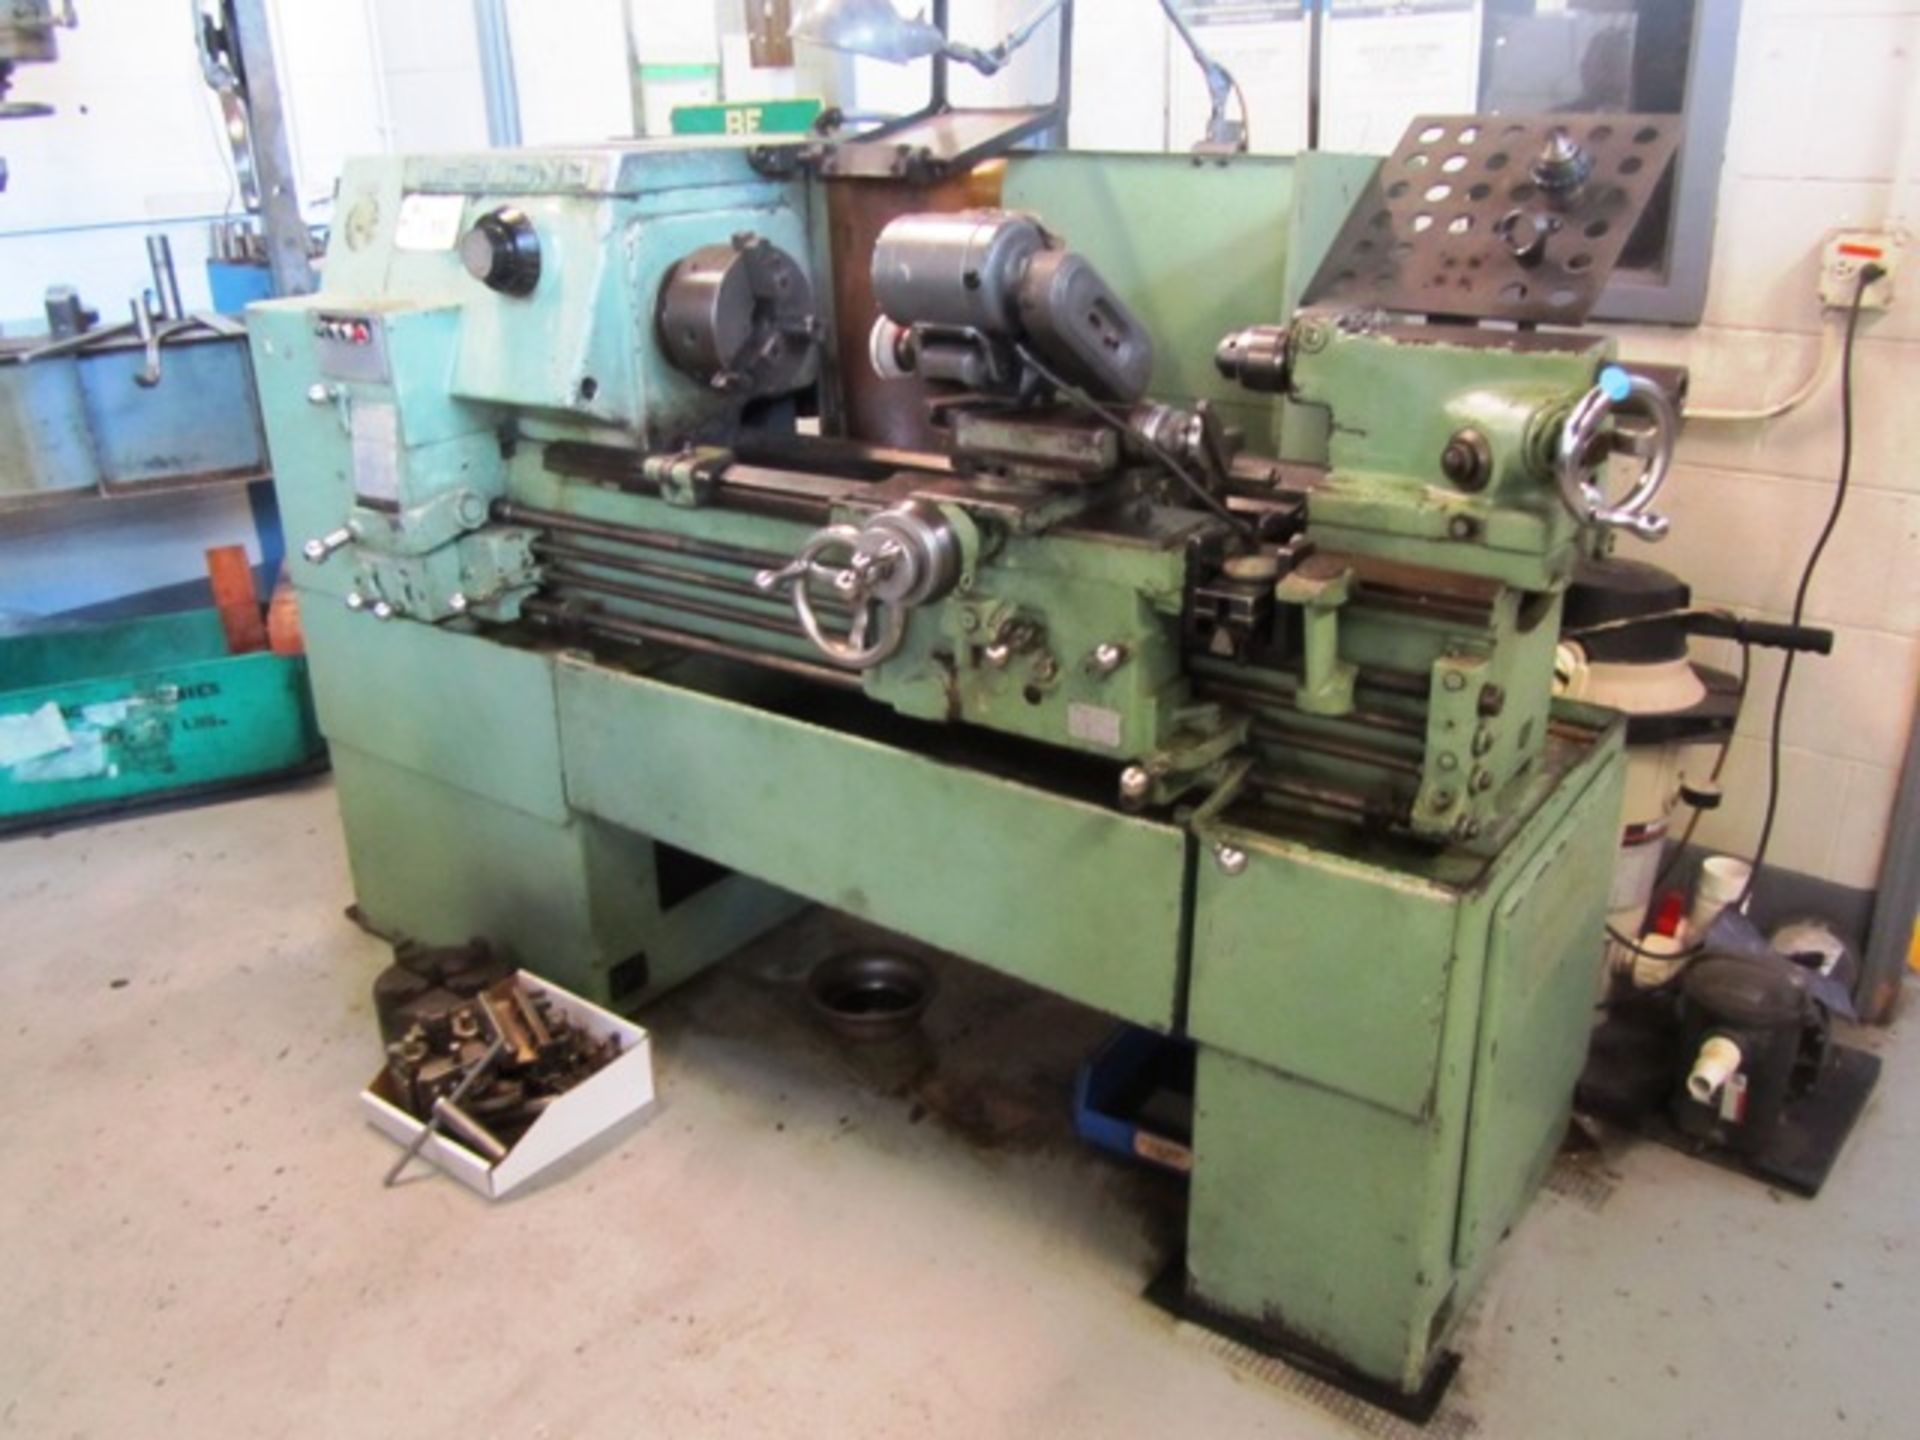 Leblonde 18'' x 36'' Toolroom Lathe with Spindle Speeds to 2400RPM, 3-Jaw & 4-Jaw Chucks, Threading, - Image 3 of 4